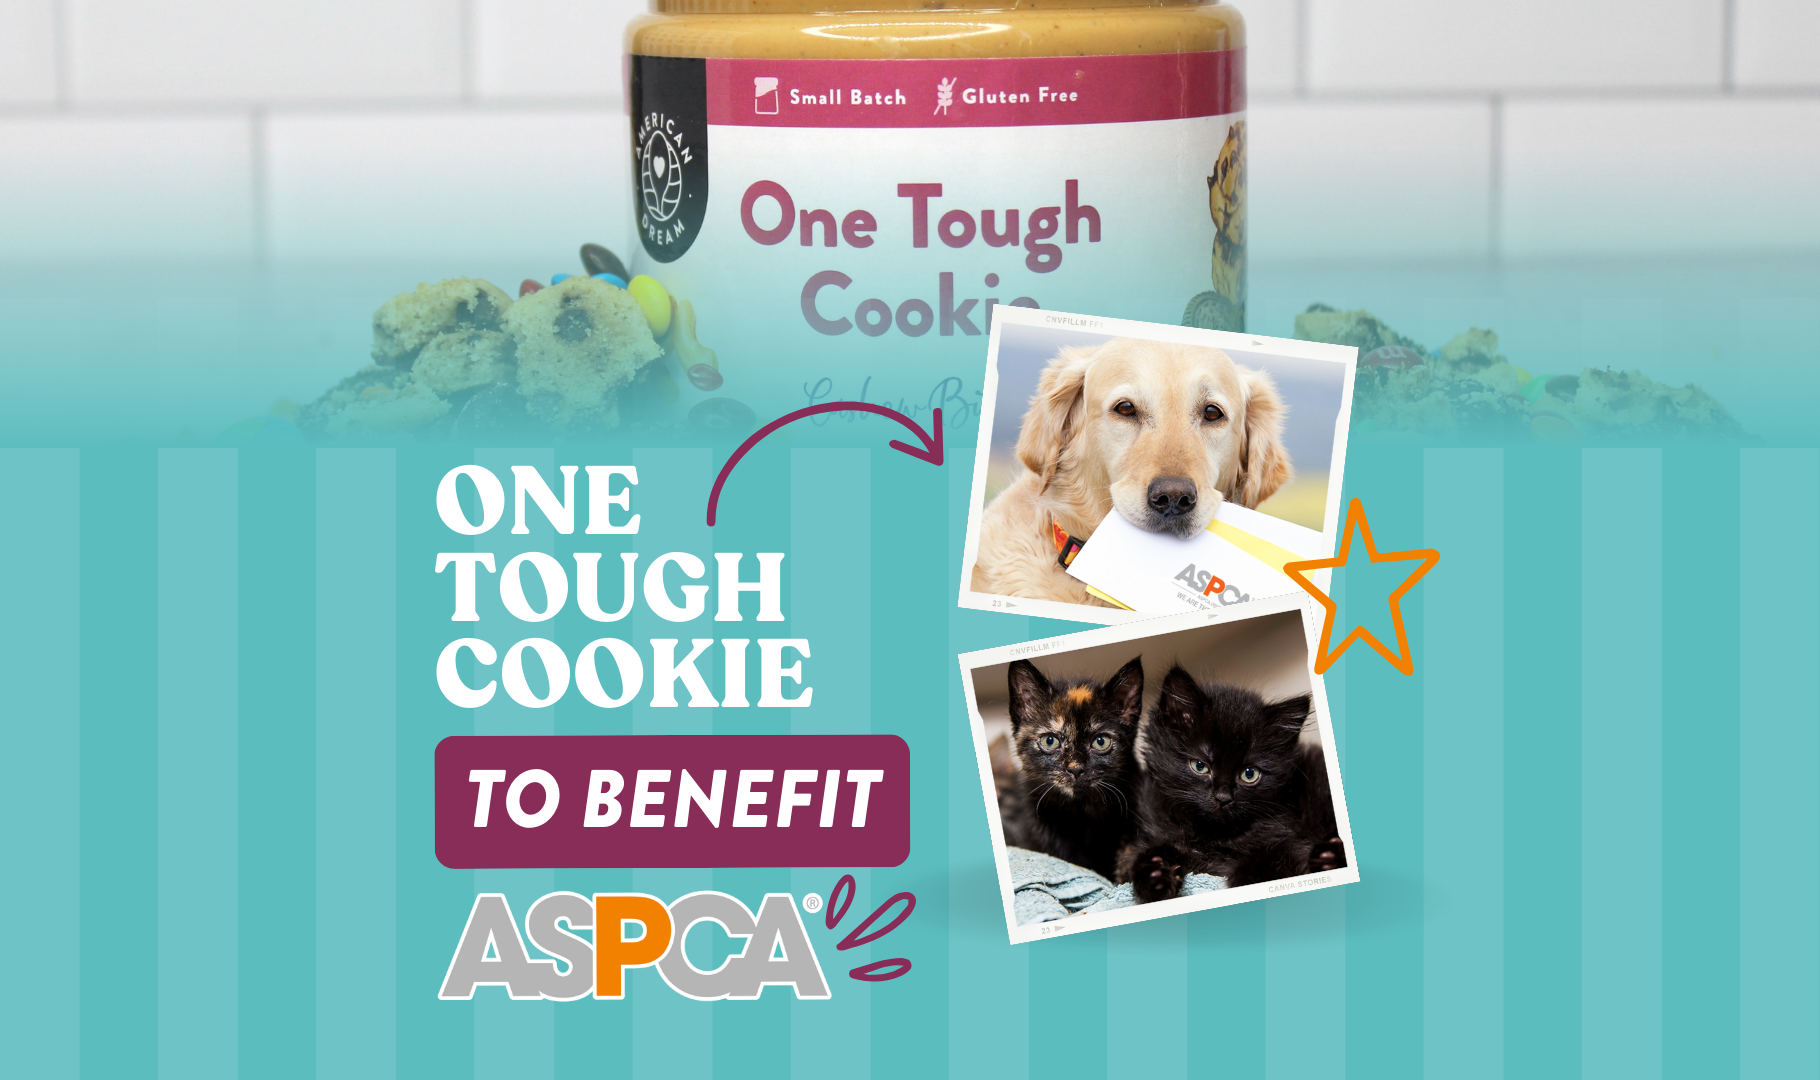 One Tough Cookie to Benefit the ASPCA